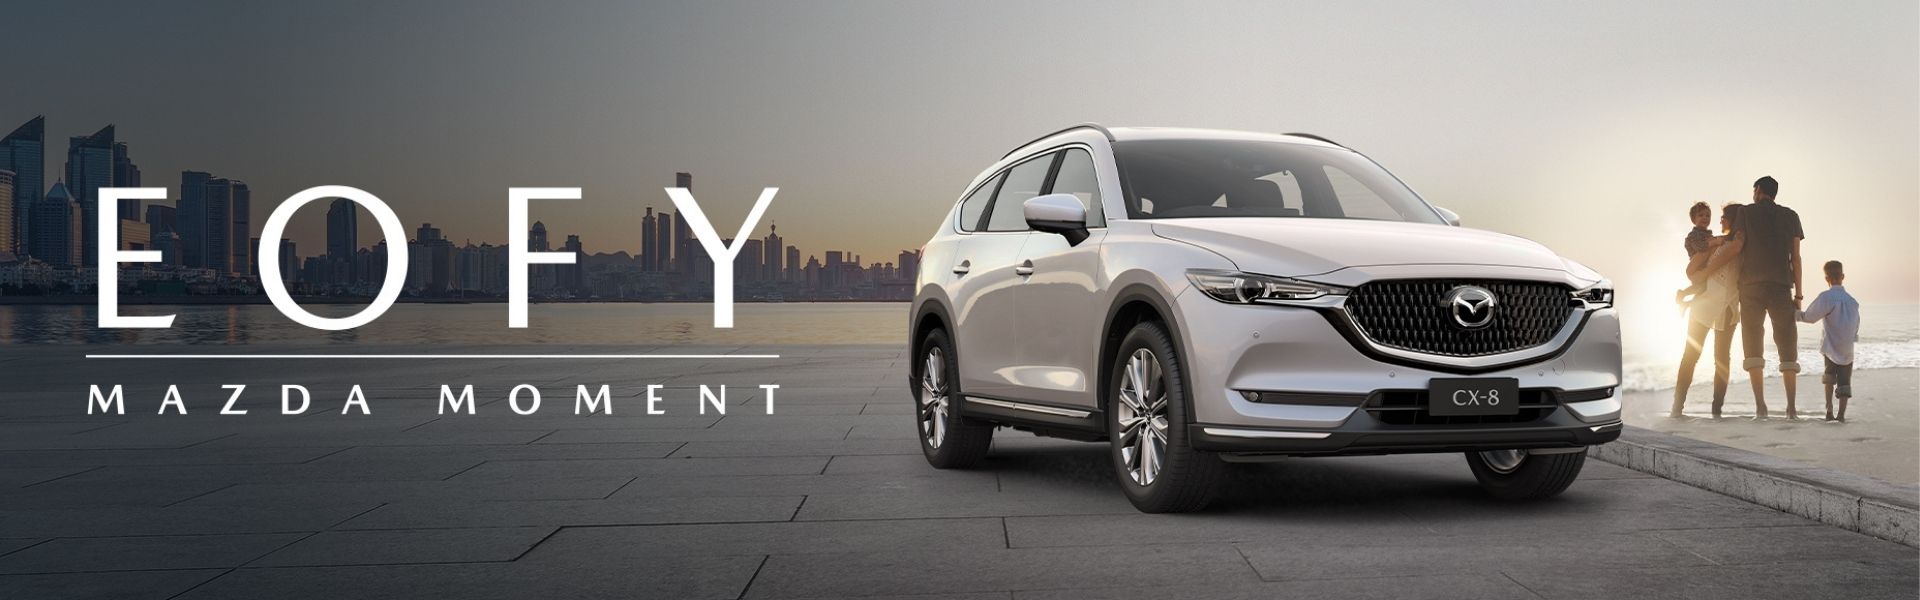 Mazda Own It Moment